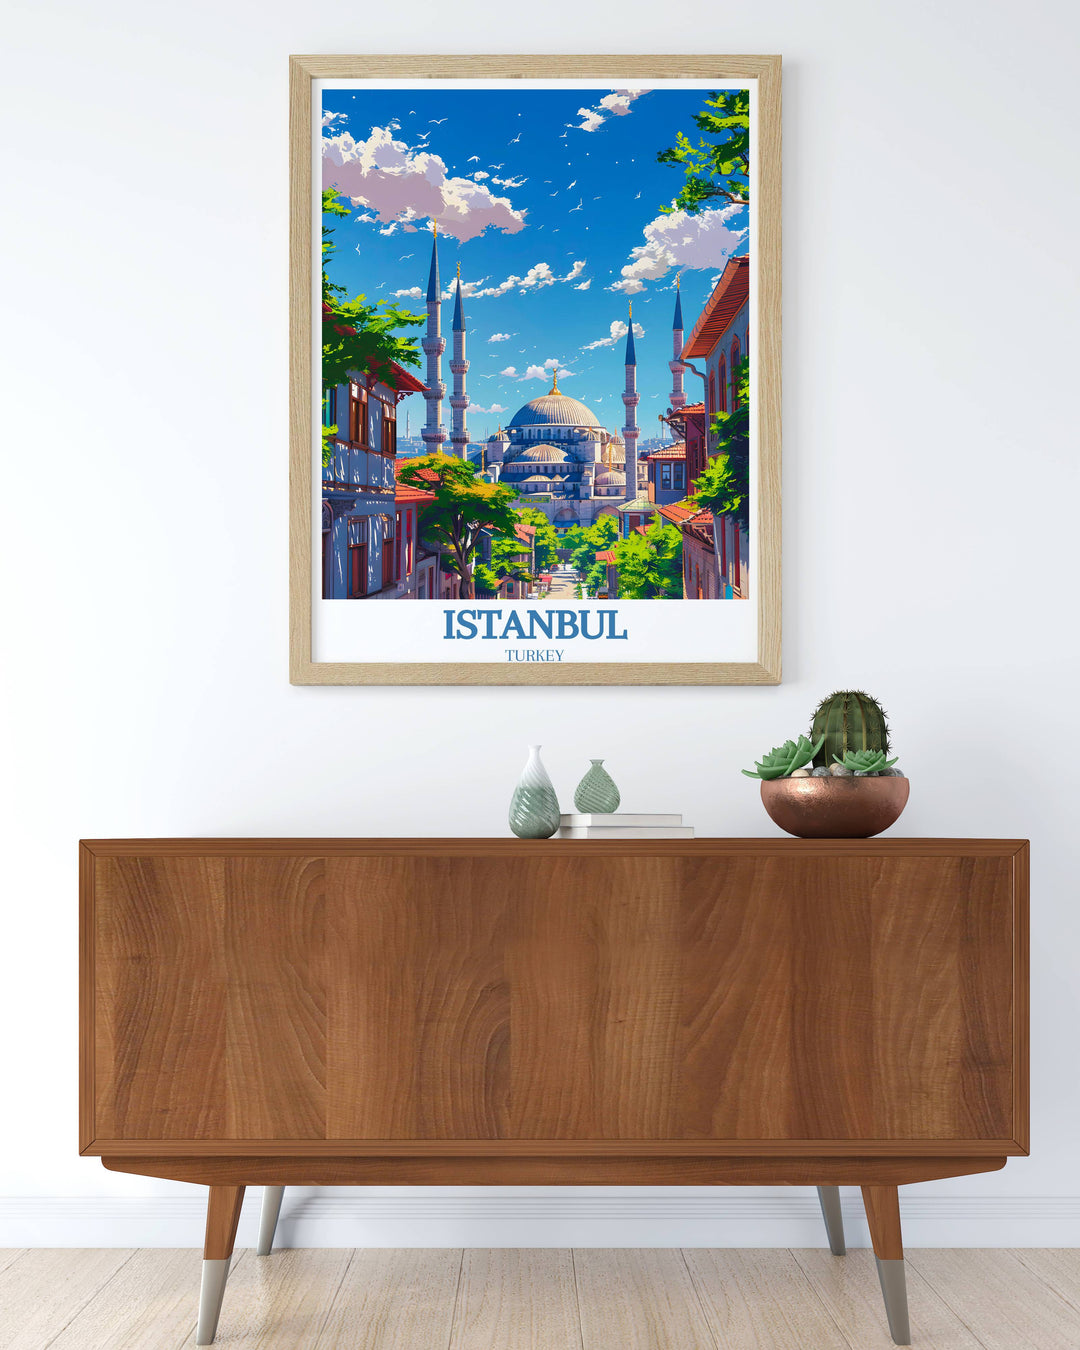 Turkish gifts art print featuring the iconic Blue Mosque, a perfect souvenir for lovers of Istanbuls heritage.